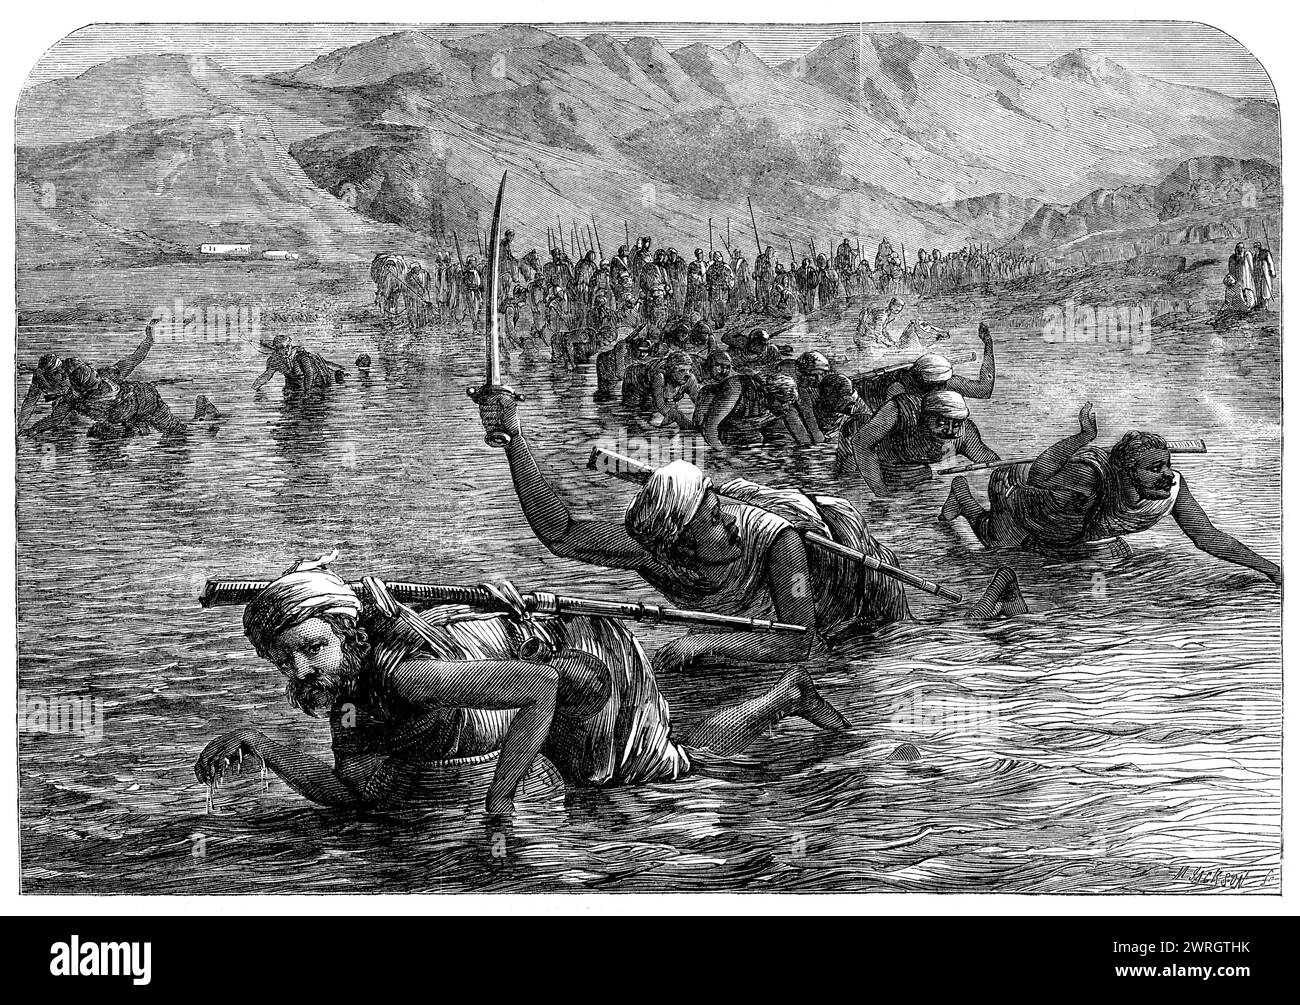 A party of Wuzurees crossing the Indus on water-jars, 1864. 'The readiness shown by the natives of India in making the most of the means at their disposal is quite a national characteristic, and is exemplified in a striking degree by the scene which we have engraved. A party of Wuzurees [ie Waziris,  are crossing the river Indus leaning on water-jars, which buoy them up sufficiently to keep their matchlocks and ammunition dry, while with their hands they paddle themselves across in precisely the same way as a dog uses his forepaws in swimming. By this means a large number can effect the passag Stock Photo